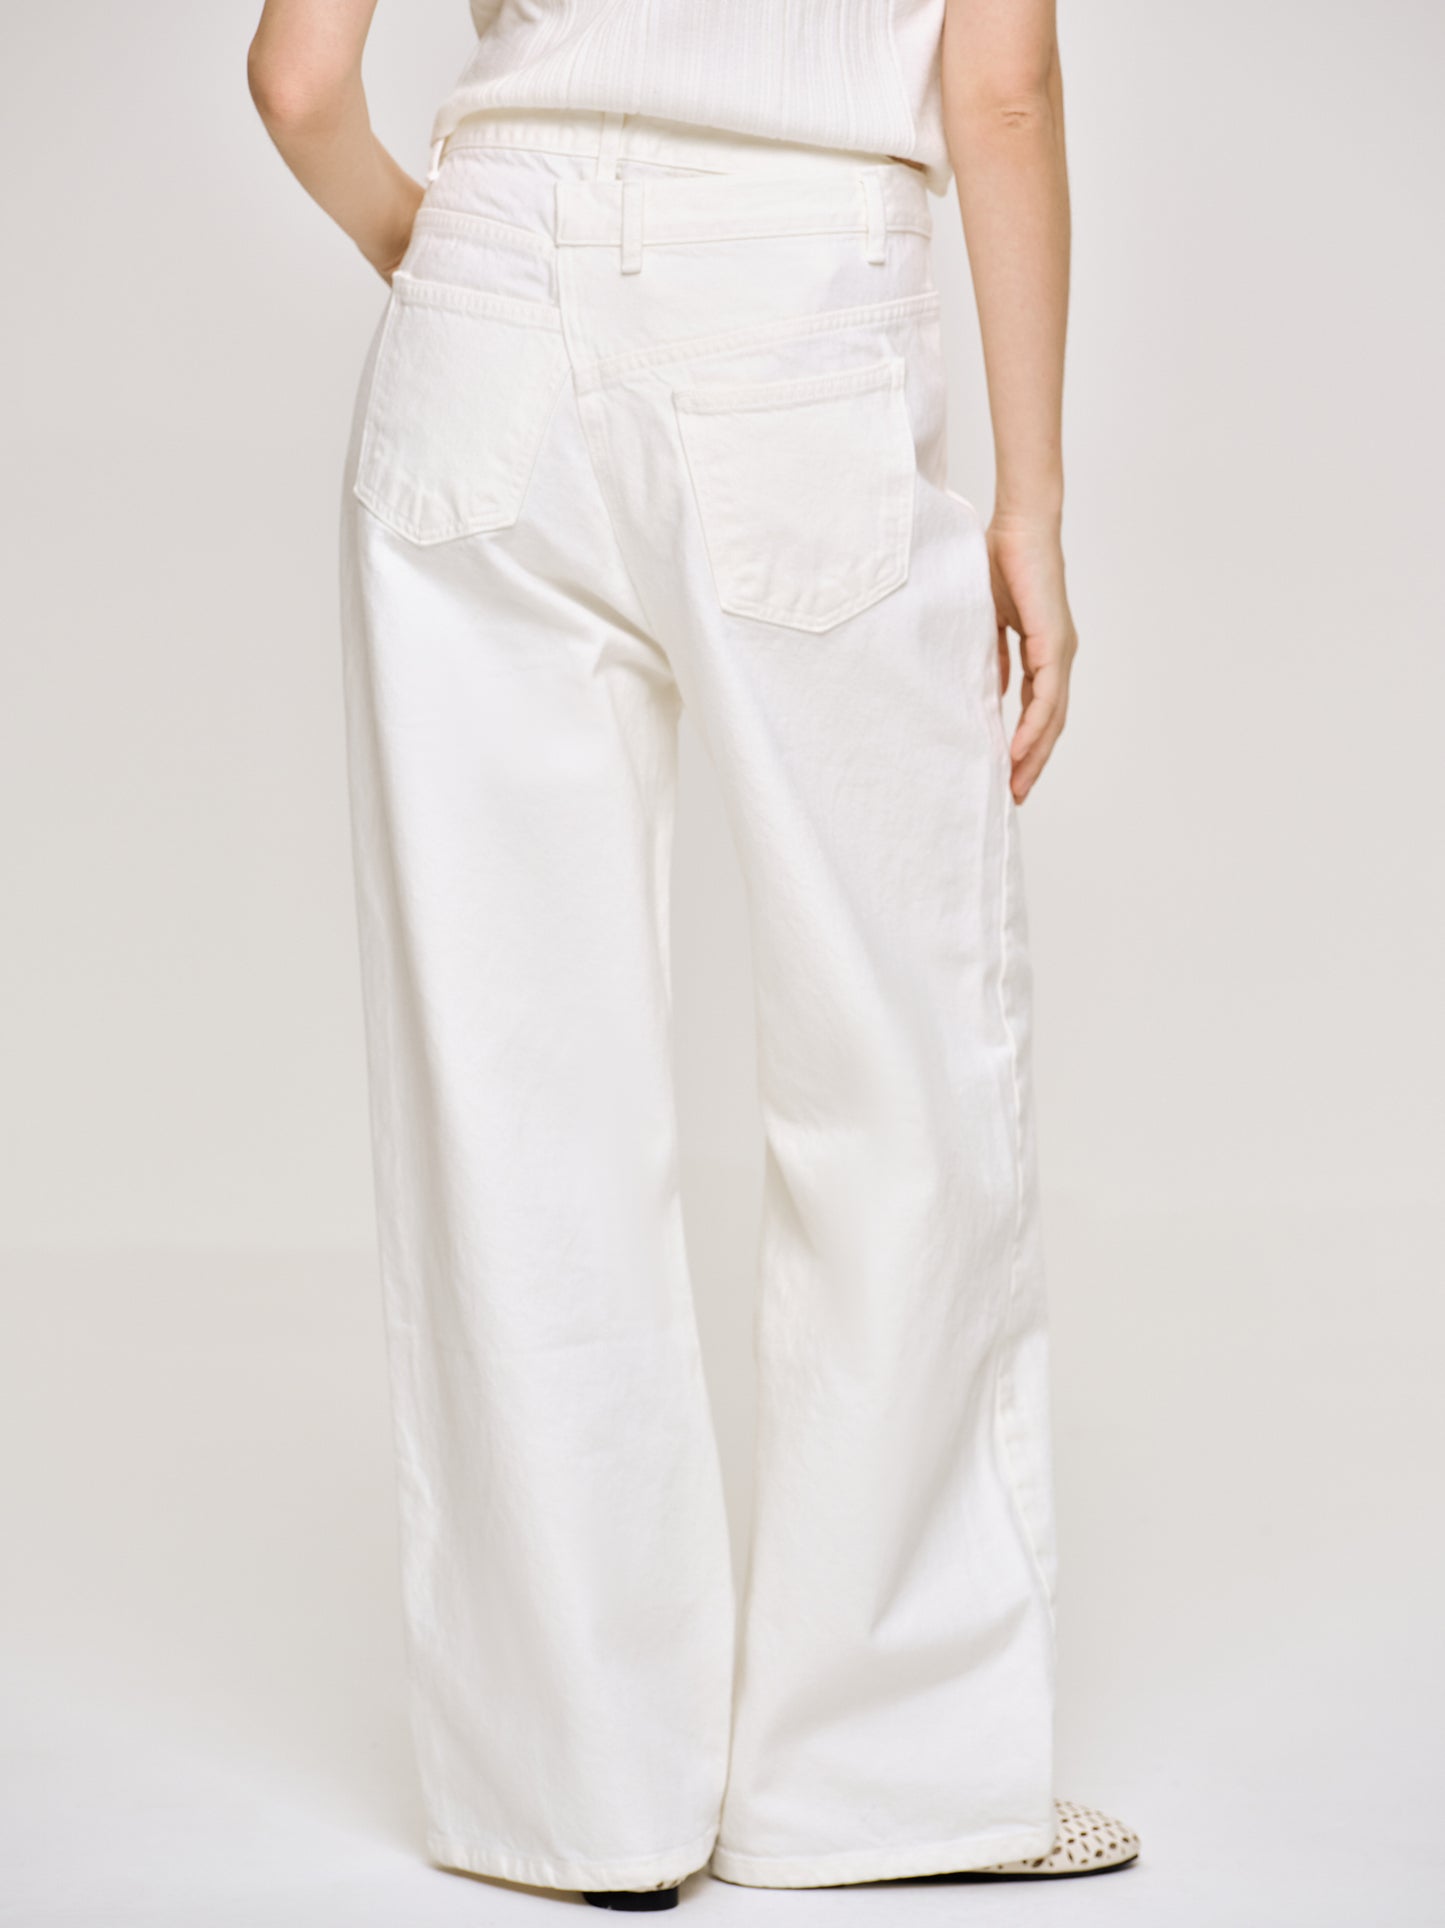 Crossover Jeans, White